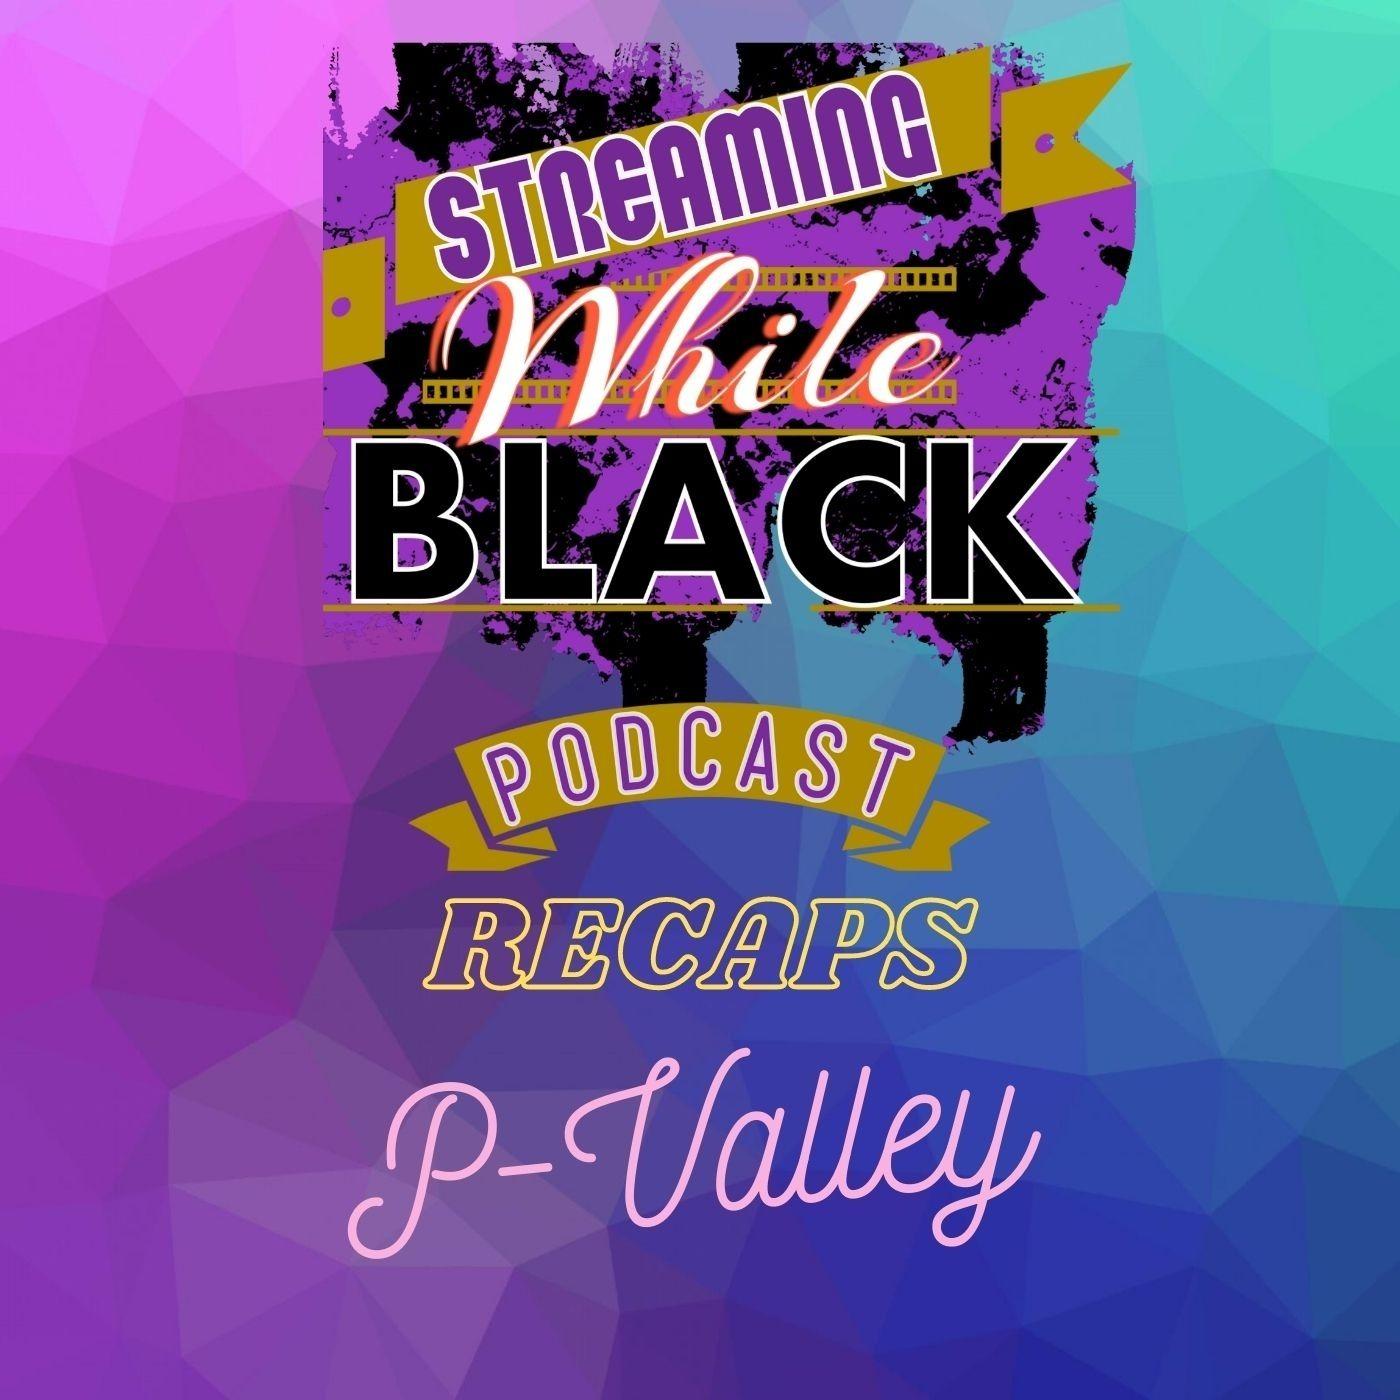 Streaming While Black recaps P-Valley